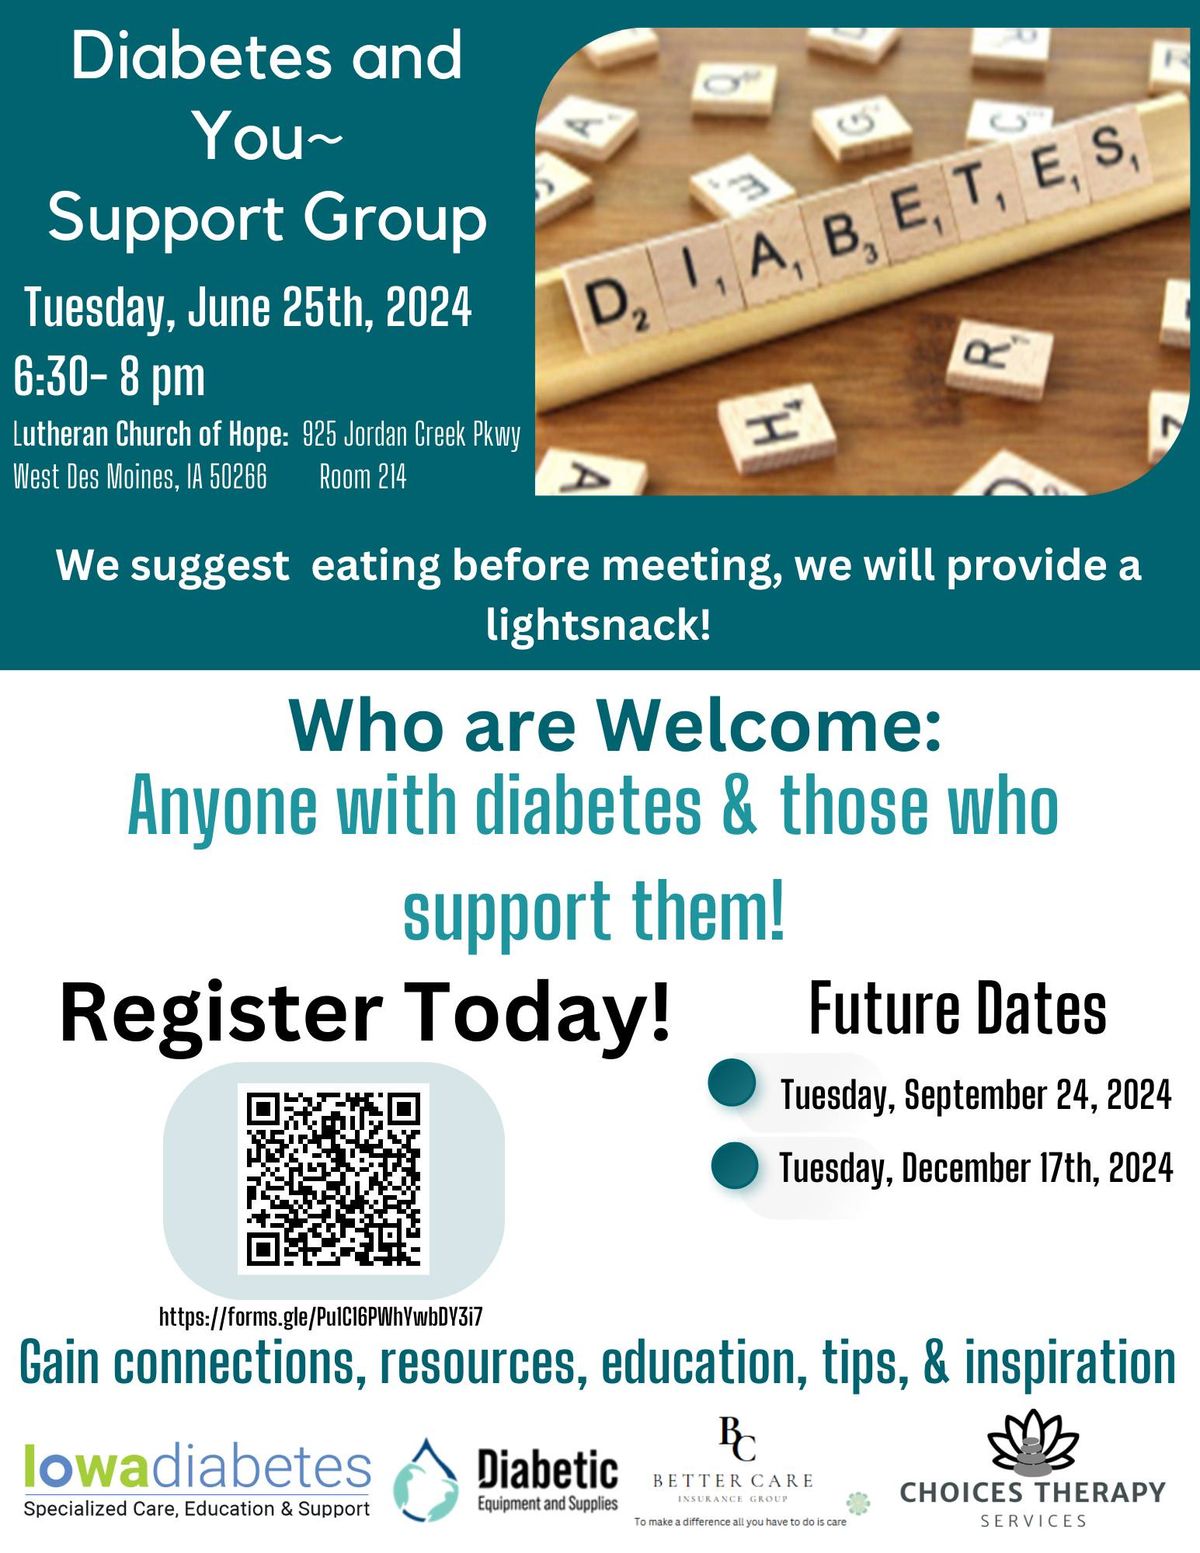 Diabetes and You support group meeting